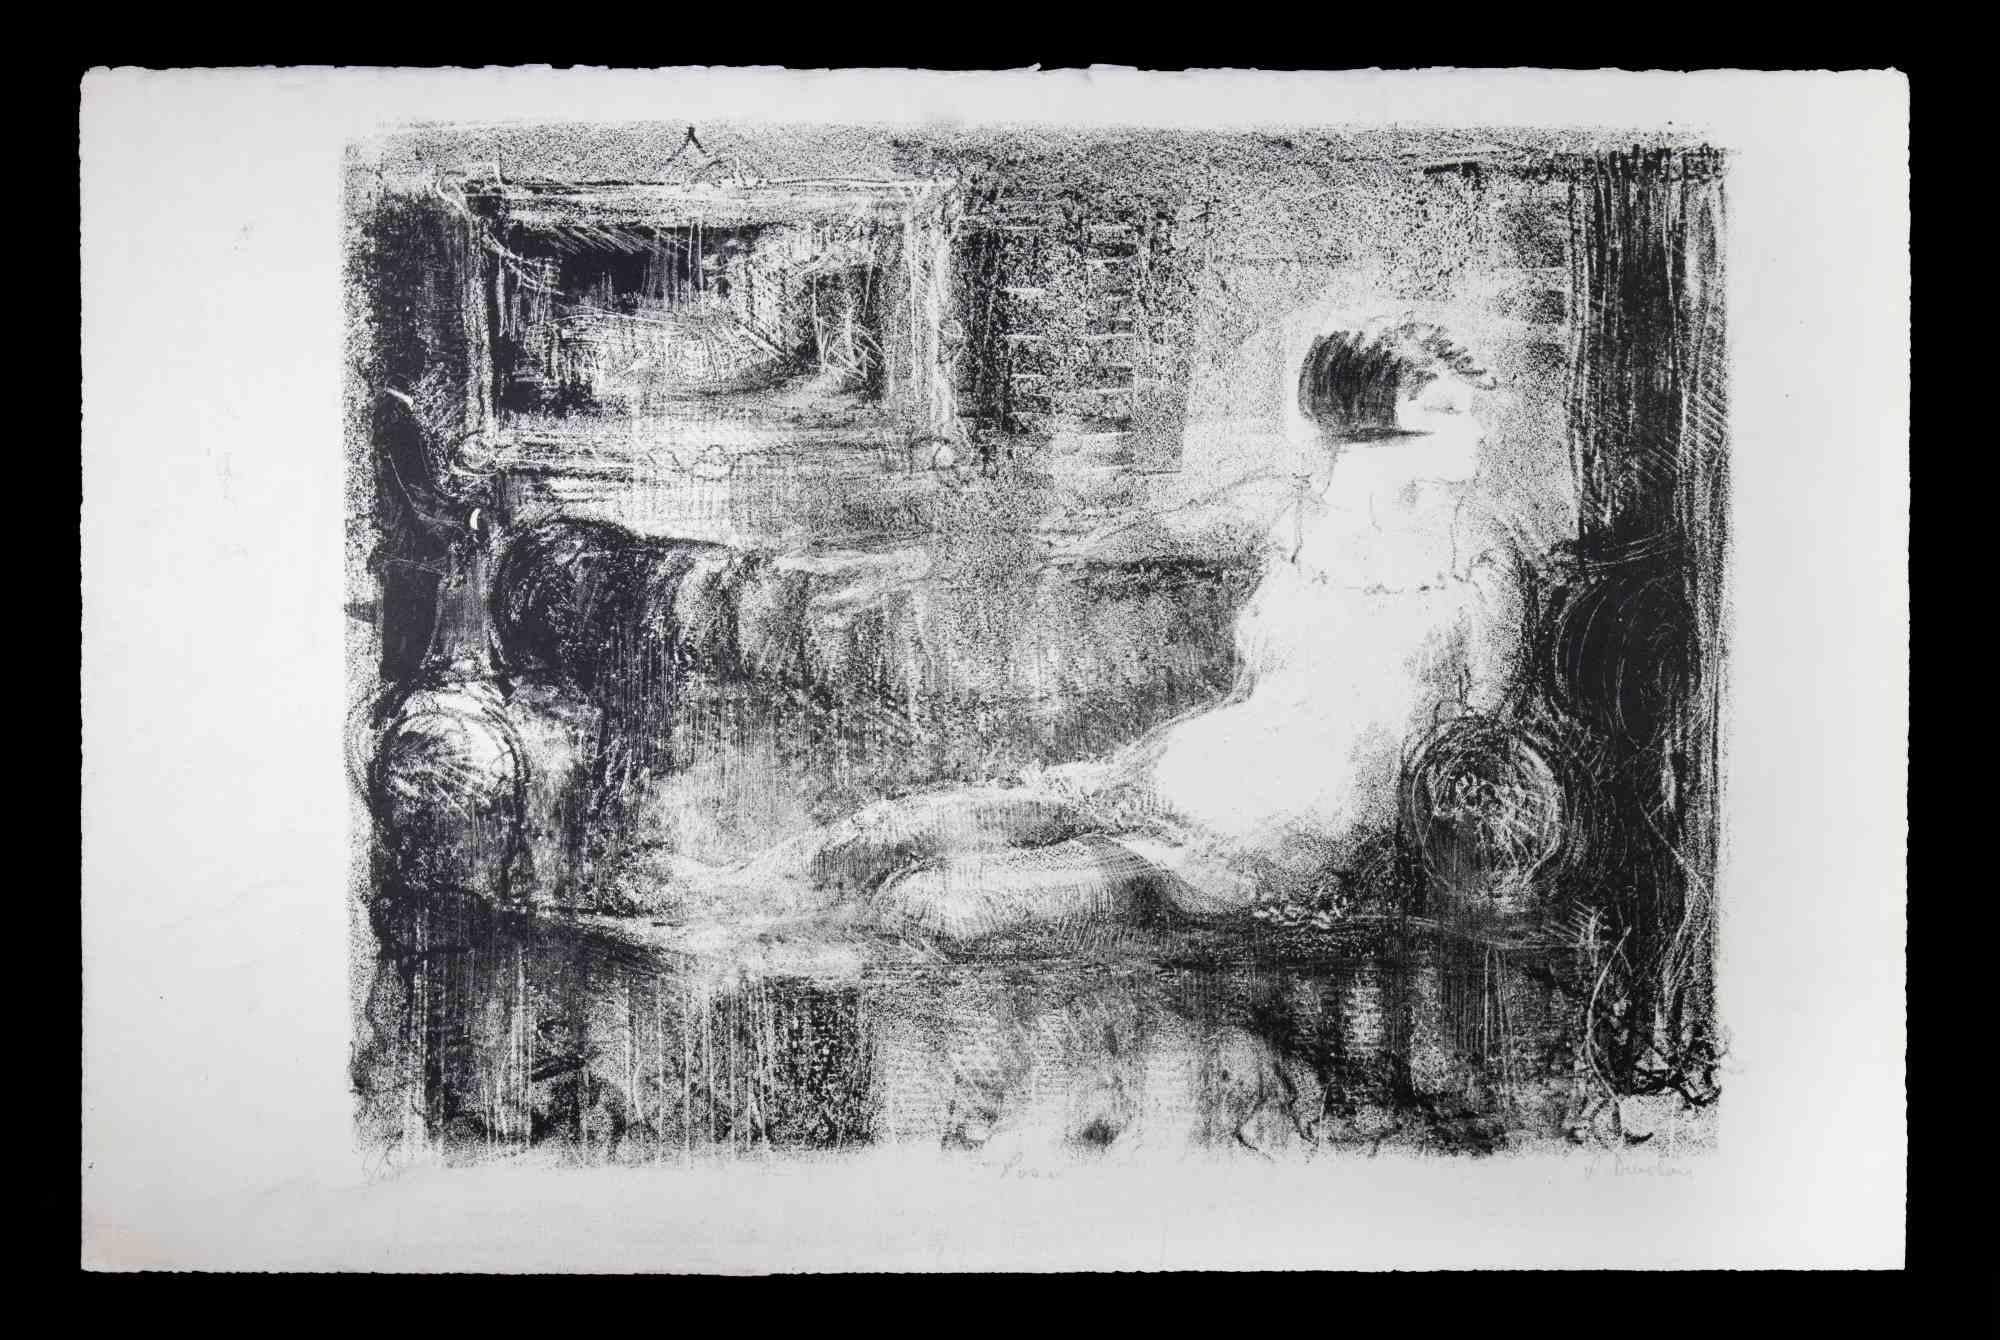 Unknown Figurative Print - Sketch of an Interior  - Original Lithograph - Mid 20th Century